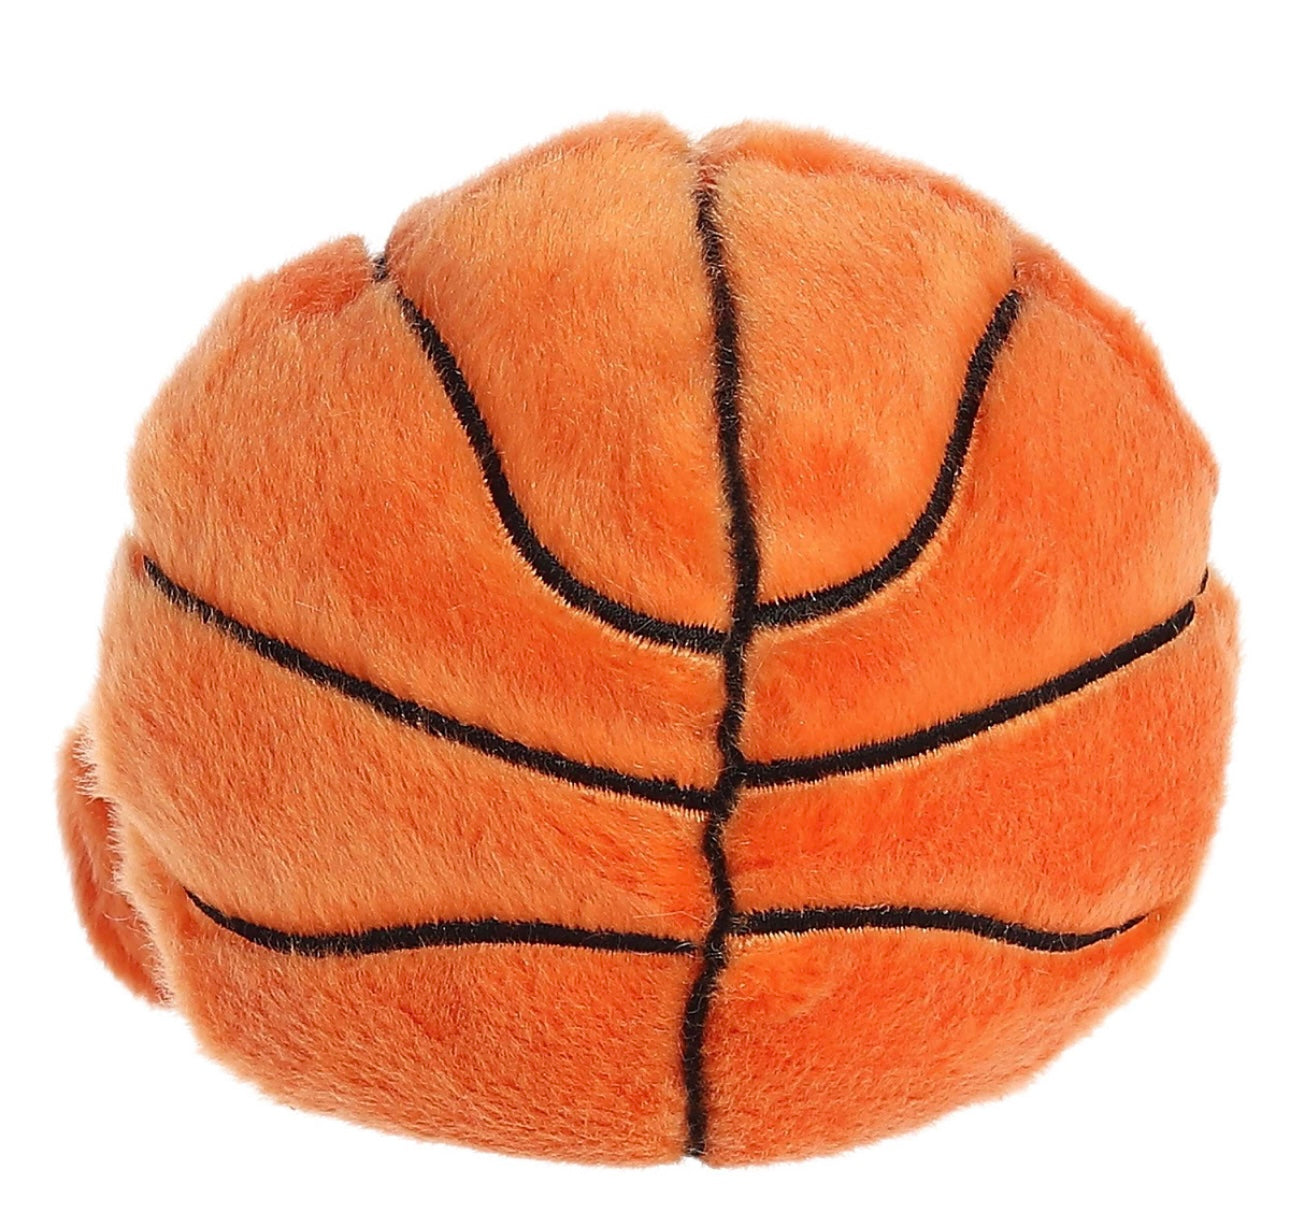 Palm Pals Hoops Basketball